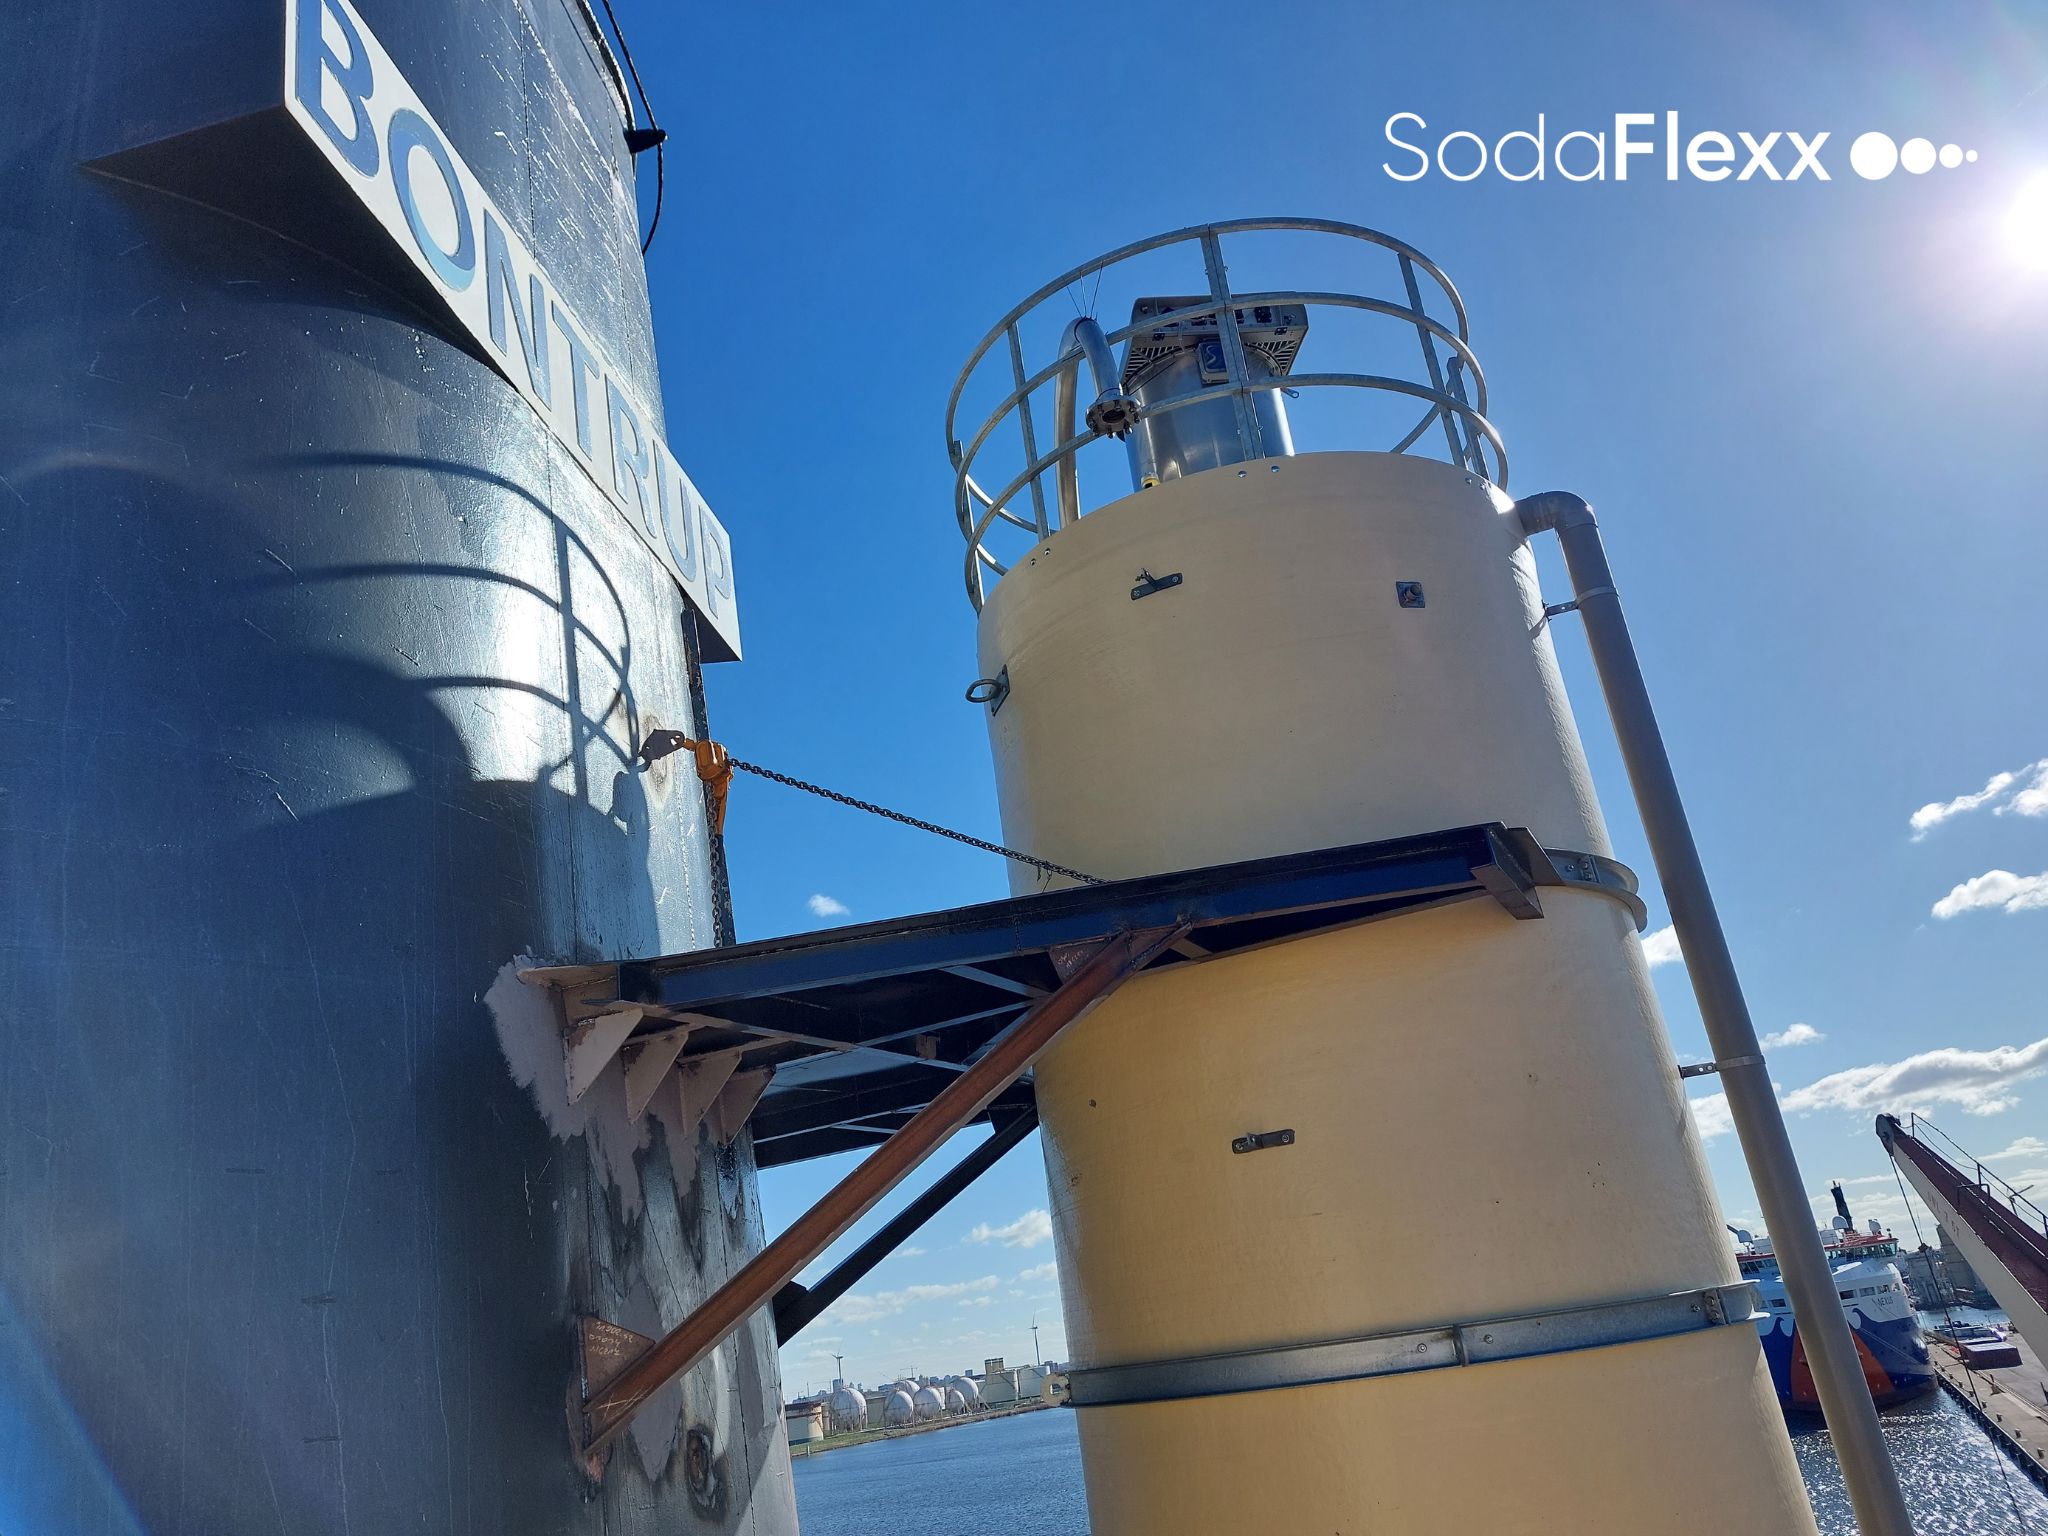 SodaFlexx International and MIP Group partner to meet the highest quality storage standards in shipping